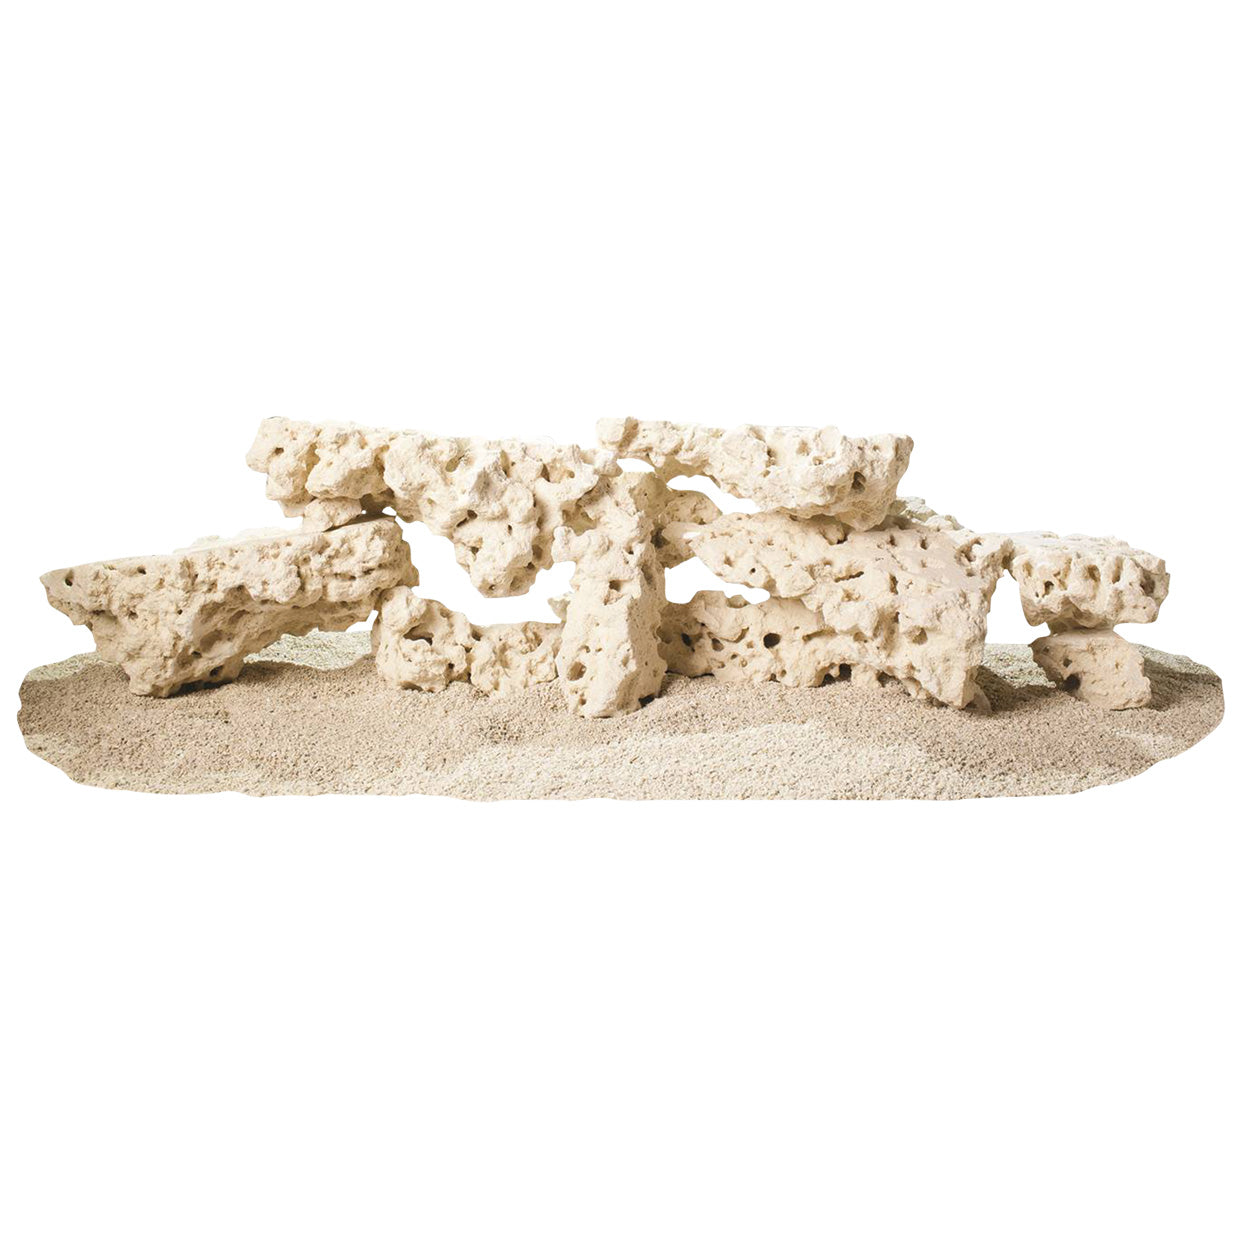 CaribSea South Seas Shelf Rock - Sold by the Pound